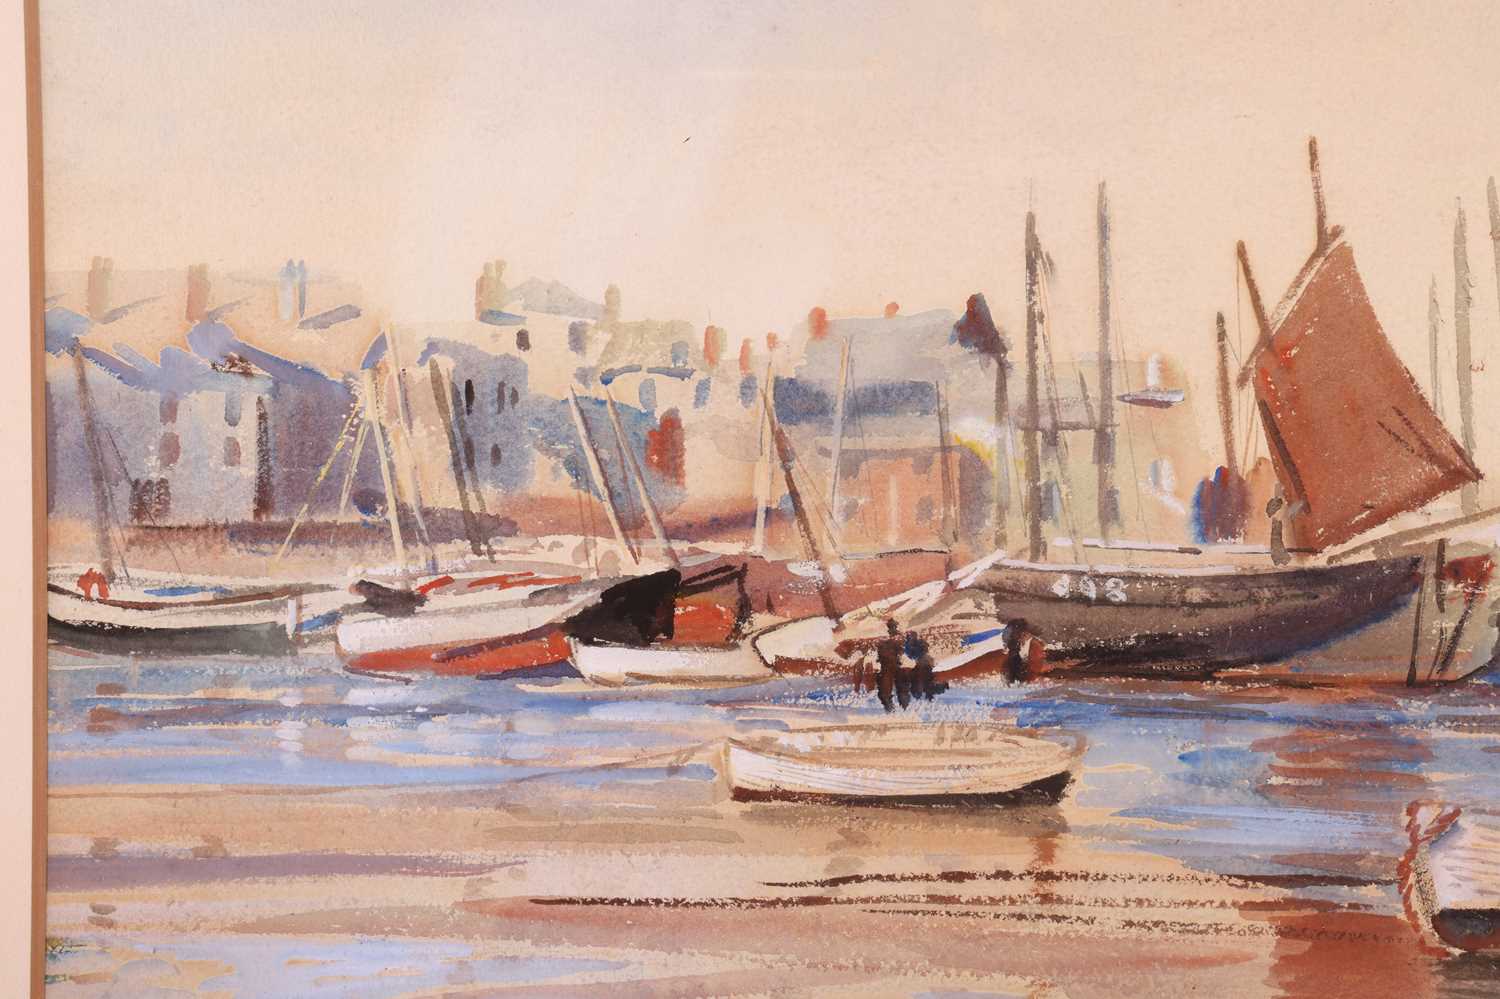 Dame Laura Knight (1877 - 1979), 'No. 1 Fishing Boats' - a harbour scene, signed Laura Knight in pen - Image 5 of 7